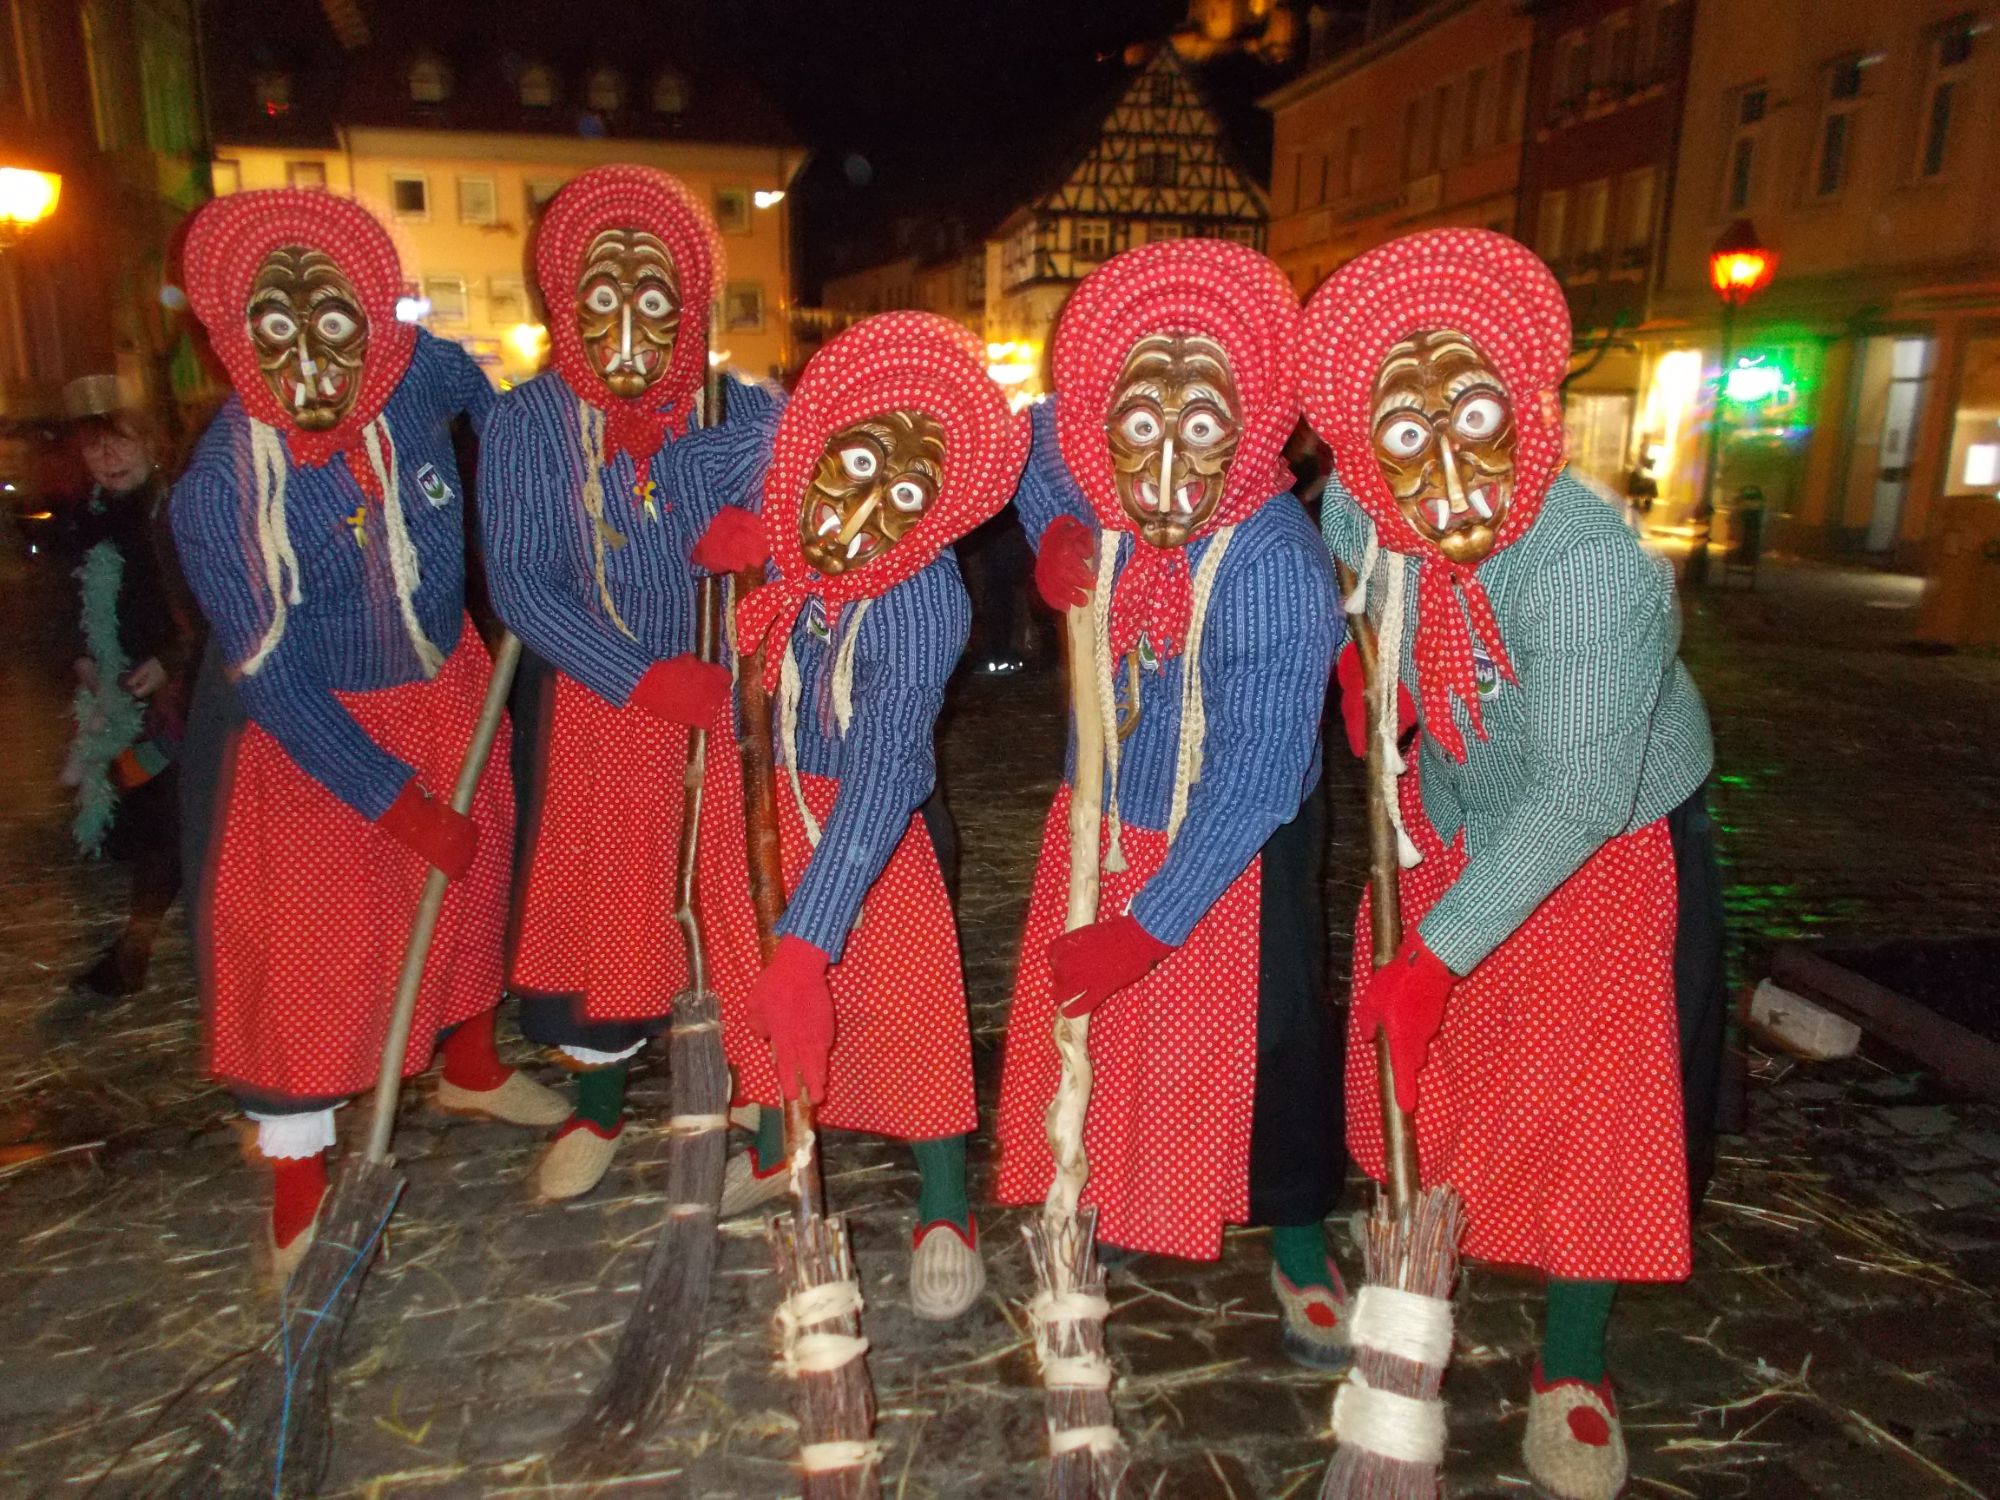 Witches of Waldkirch